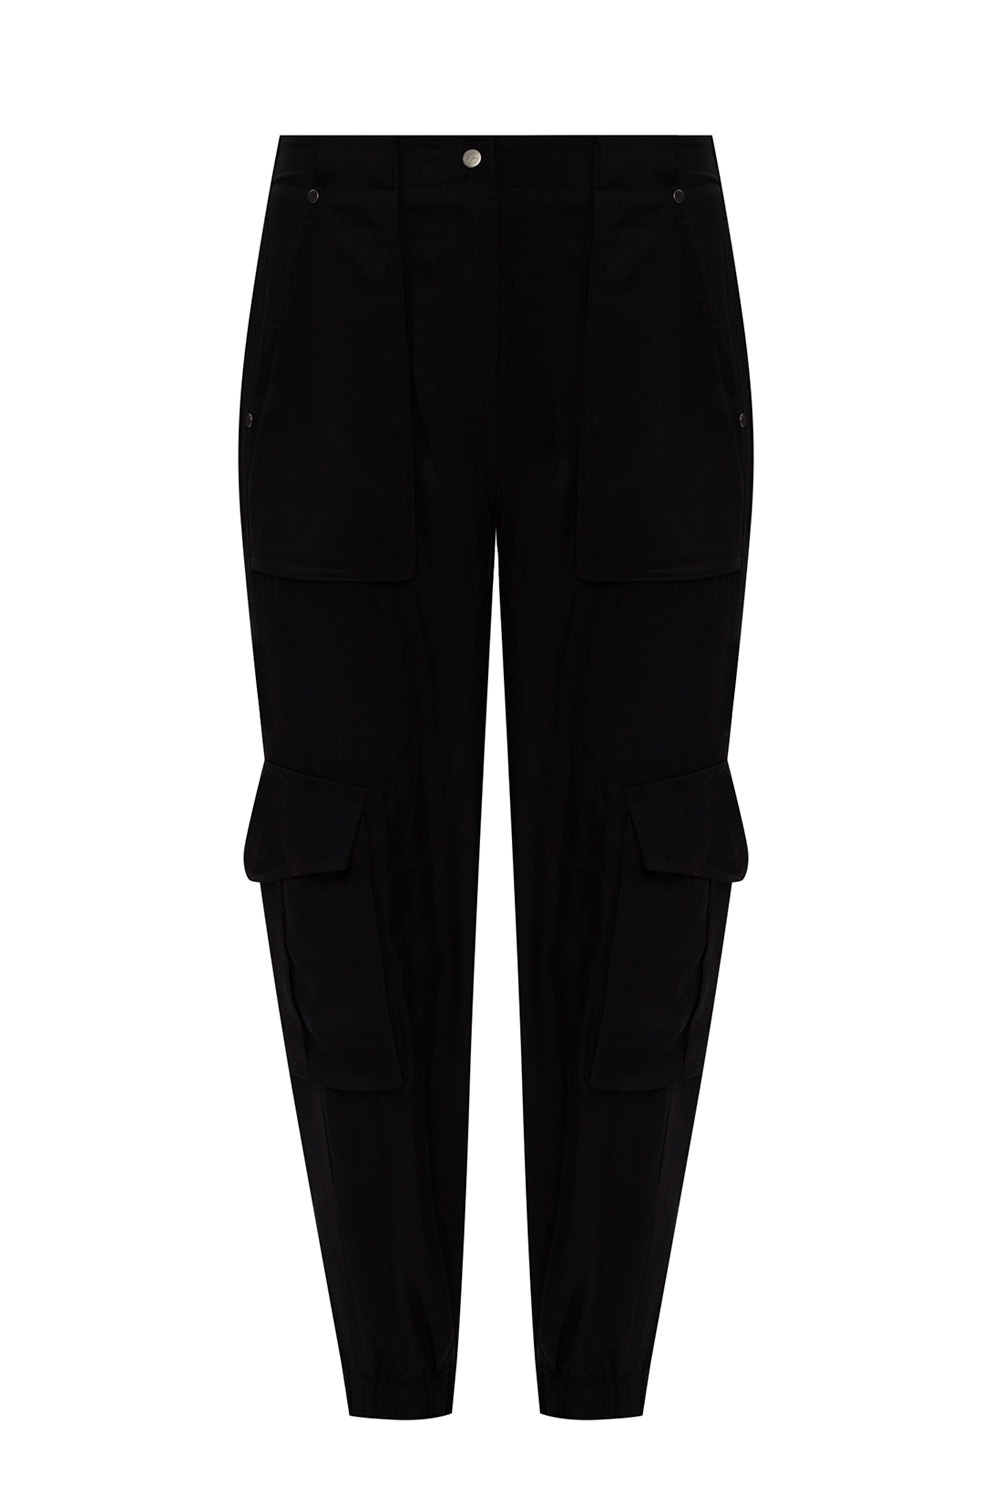 AllSaints ‘Frieda’ trousers with pockets | Women's Clothing | Vitkac